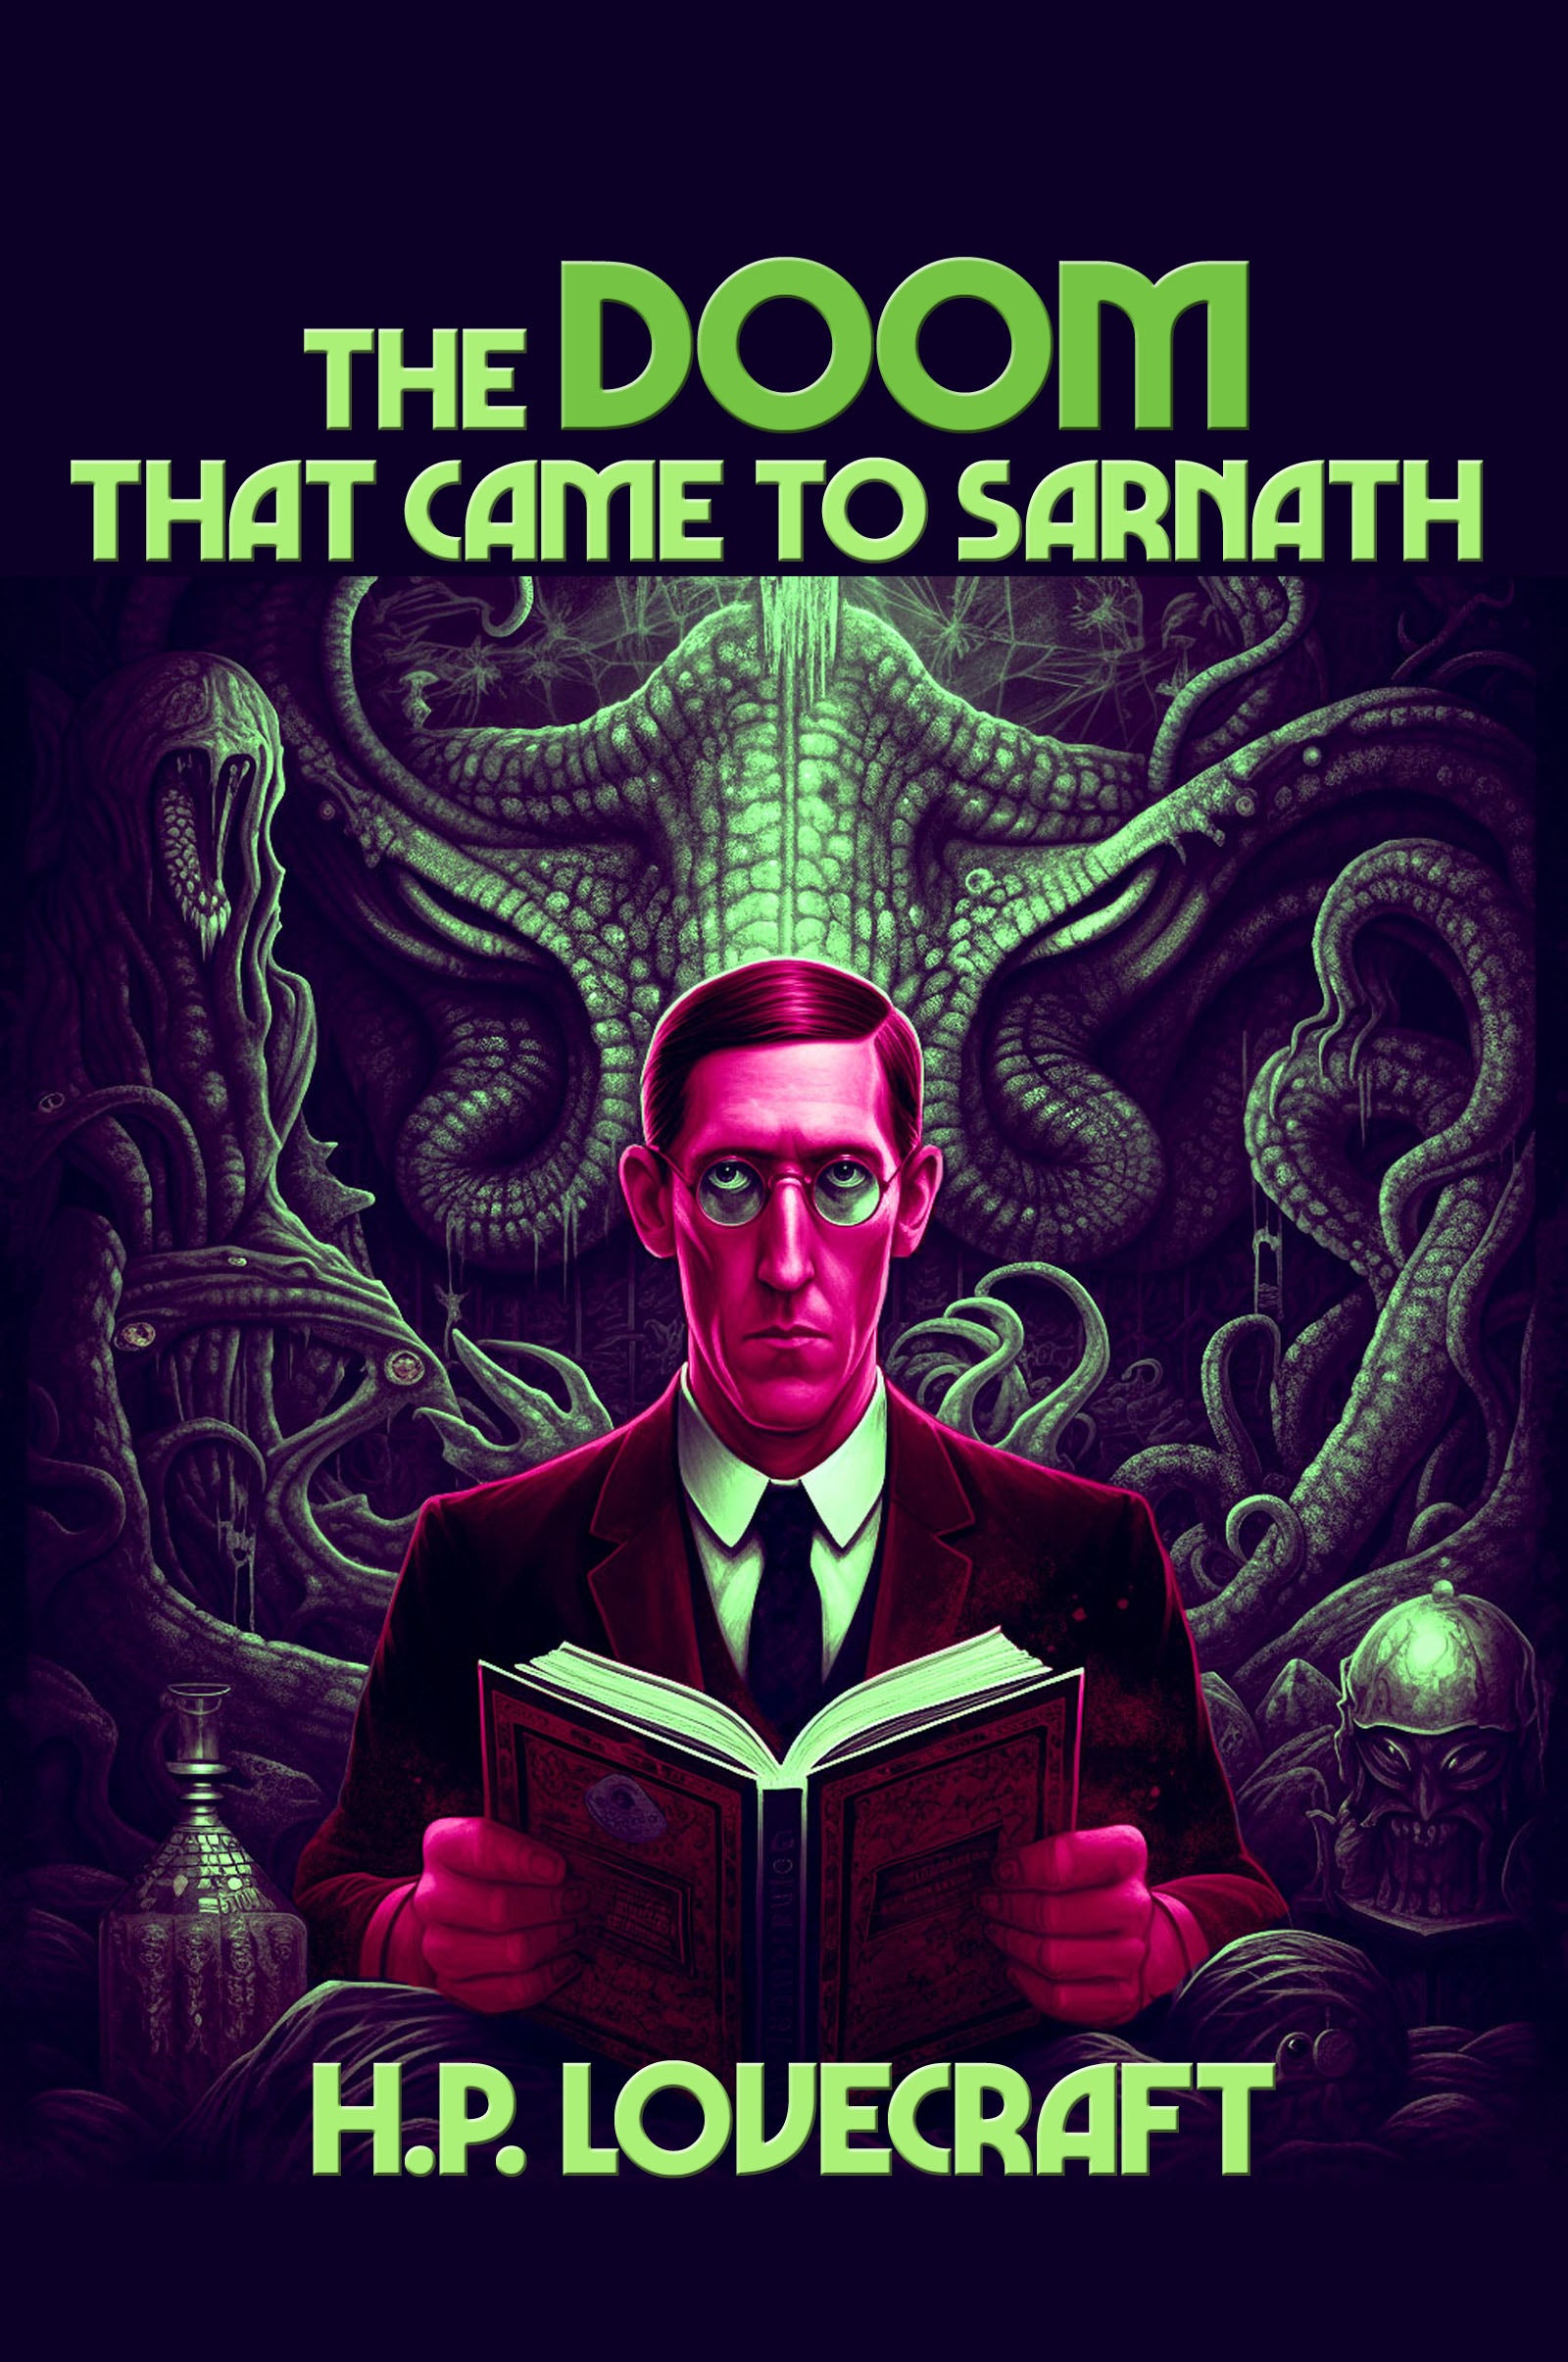 Cover art for PositronicPubs ebook: The Doom That Came To Sarnath by H.P. Lovecraft